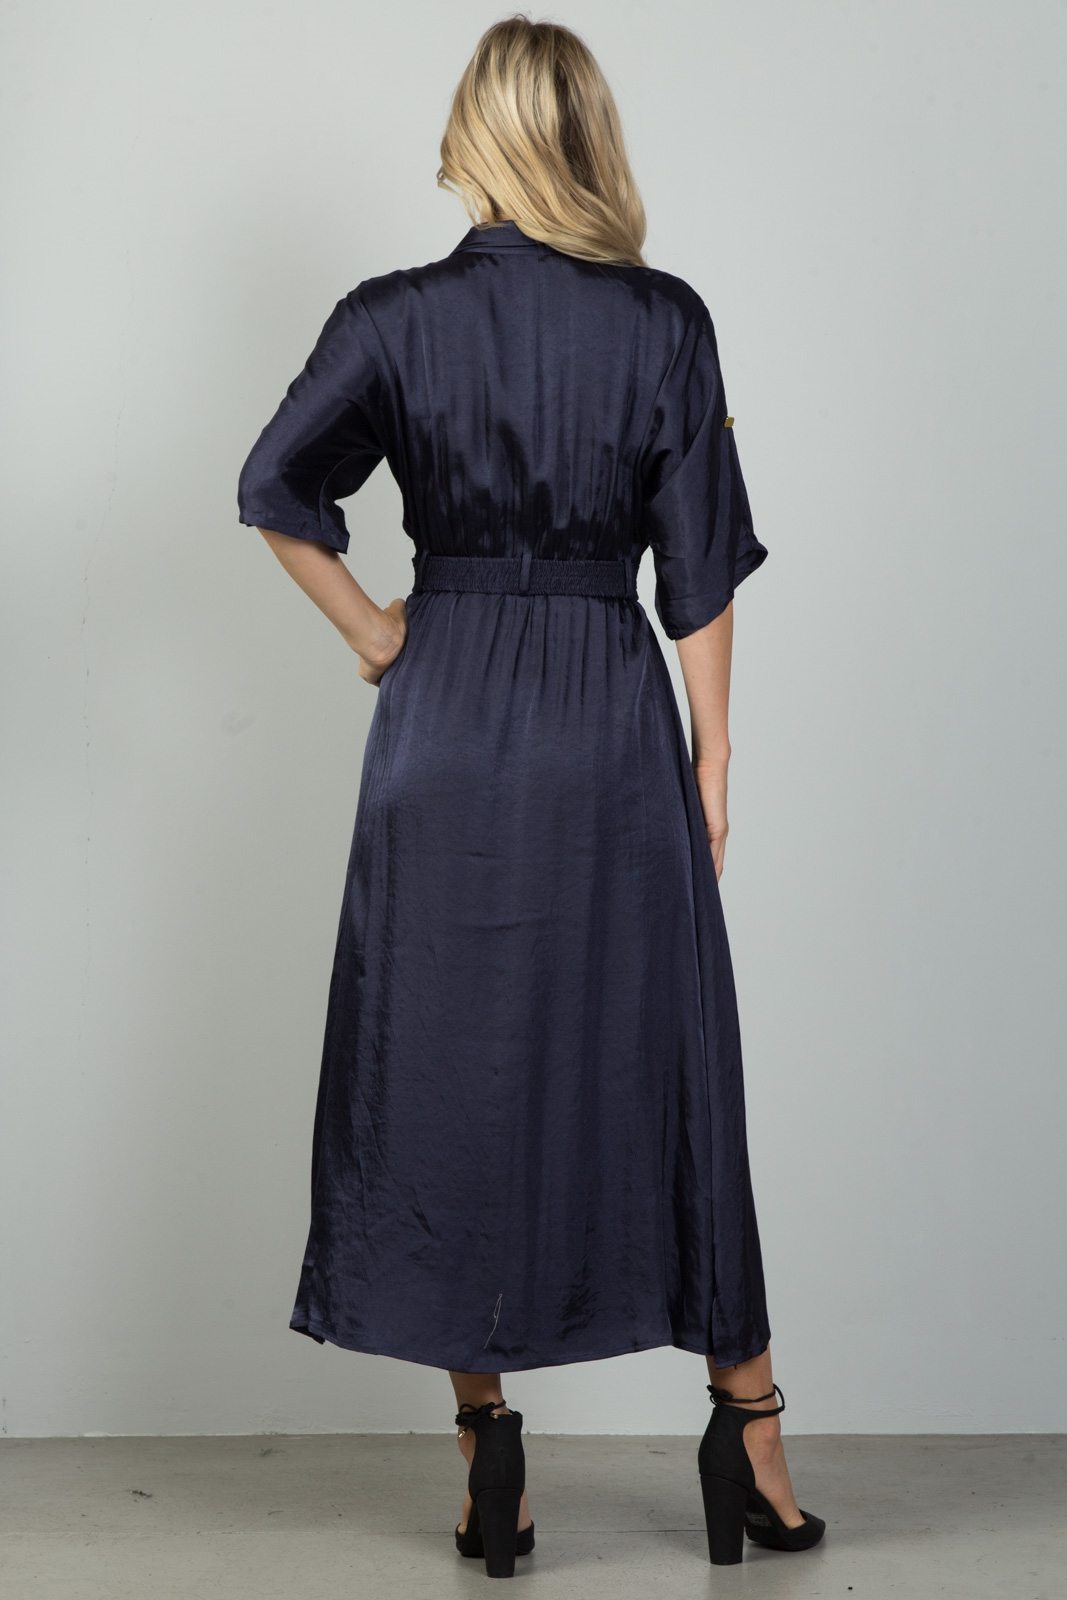 Ladies fashion button down elastic belted maxi dress